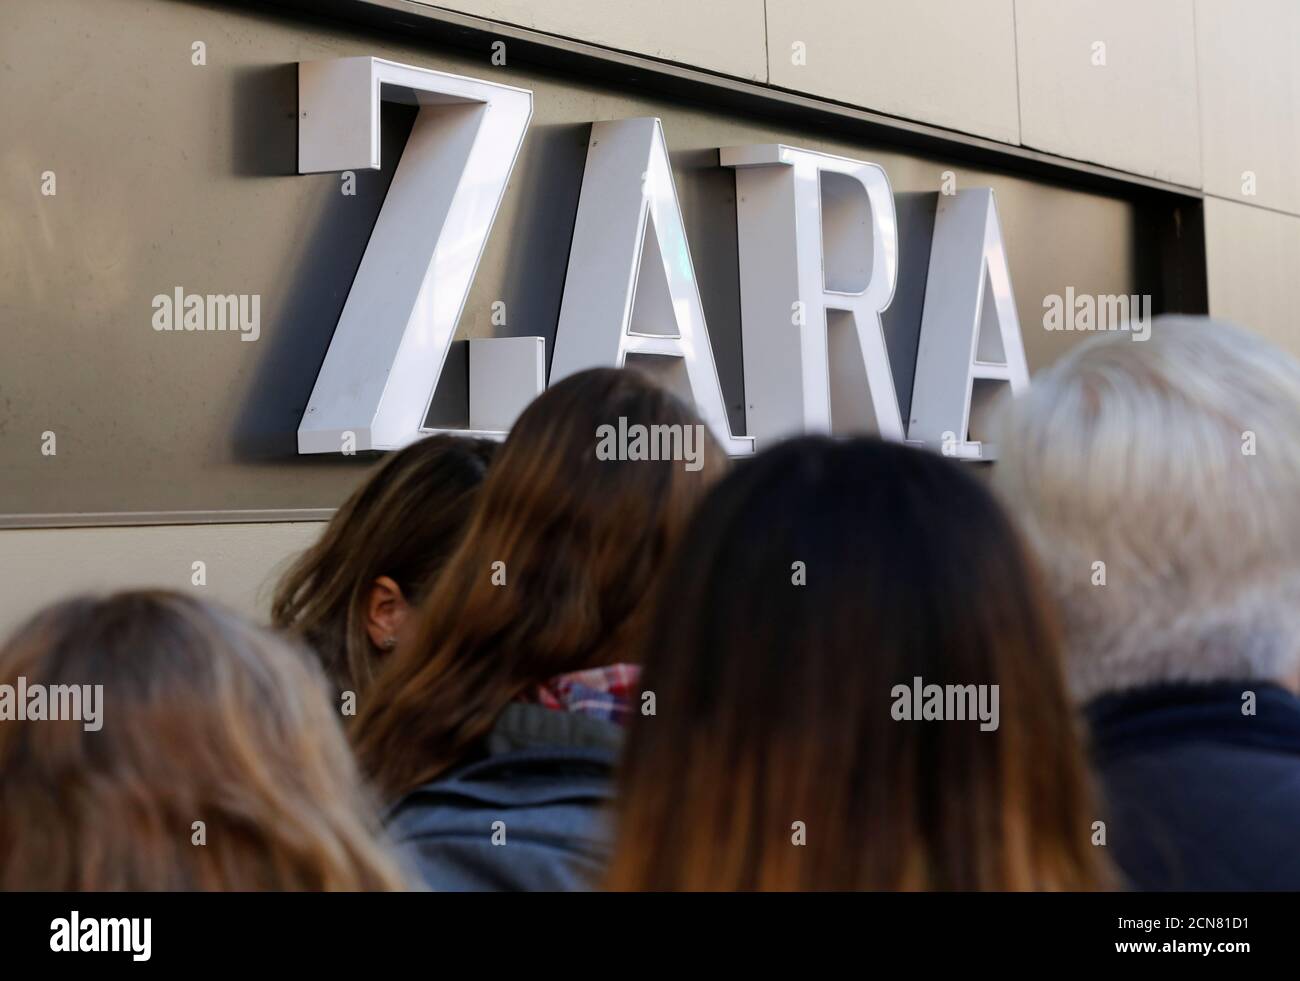 People walk past a Zara logo in the Andalusian capital of Seville, southern  Spain March 3, 2016. REUTERS/Marcelo del Pozo Stock Photo - Alamy